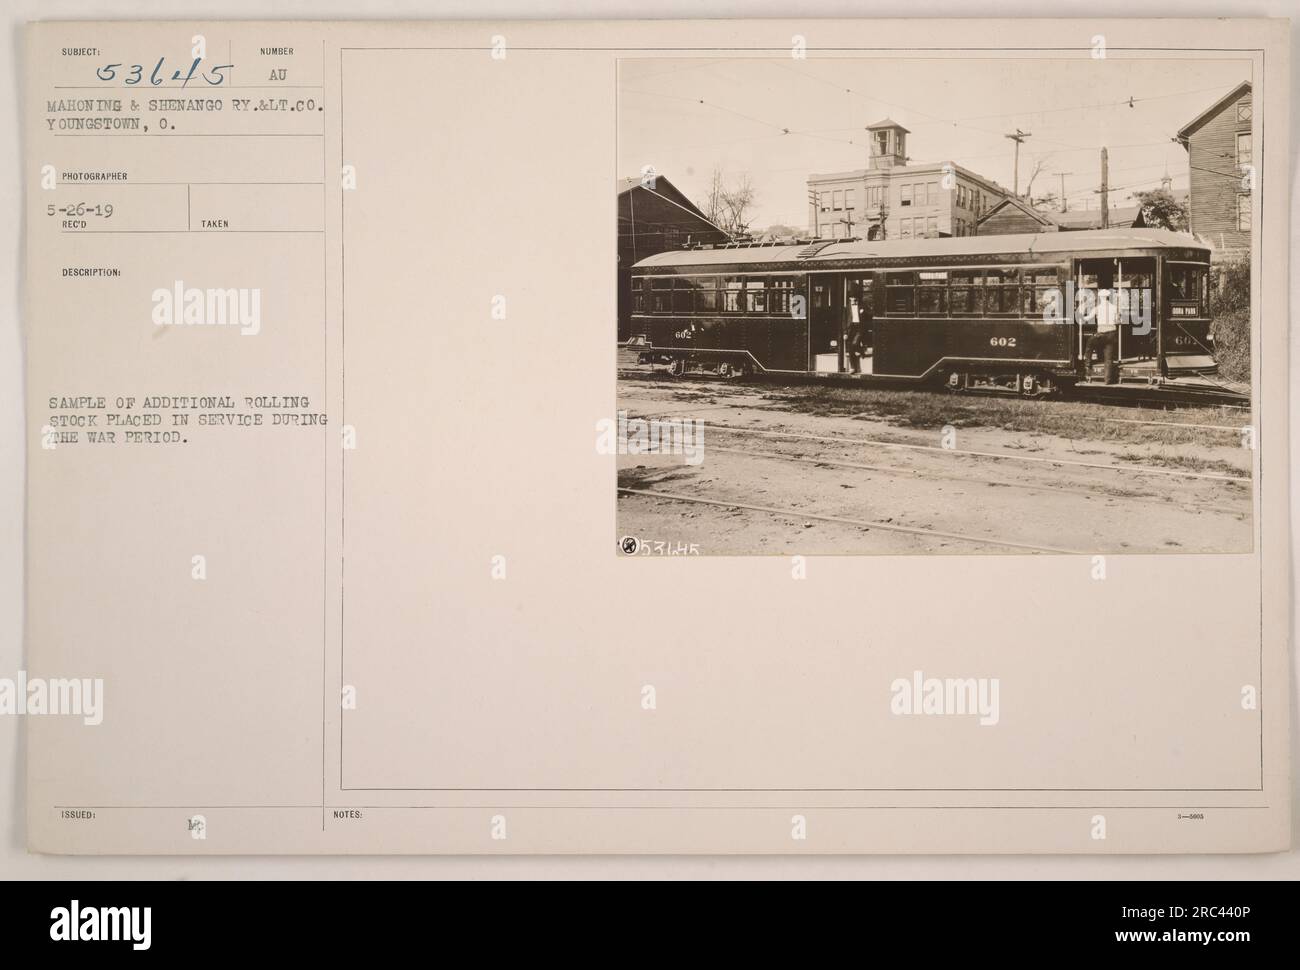 Image depicting a sample of additional rolling stock put into service by the Mahoning & Shenango Railway in Youngstown, Ohio during World War I. Photograph taken on May 26, 1919. Photographer: McAU. Issue number: 602. Stock Photo